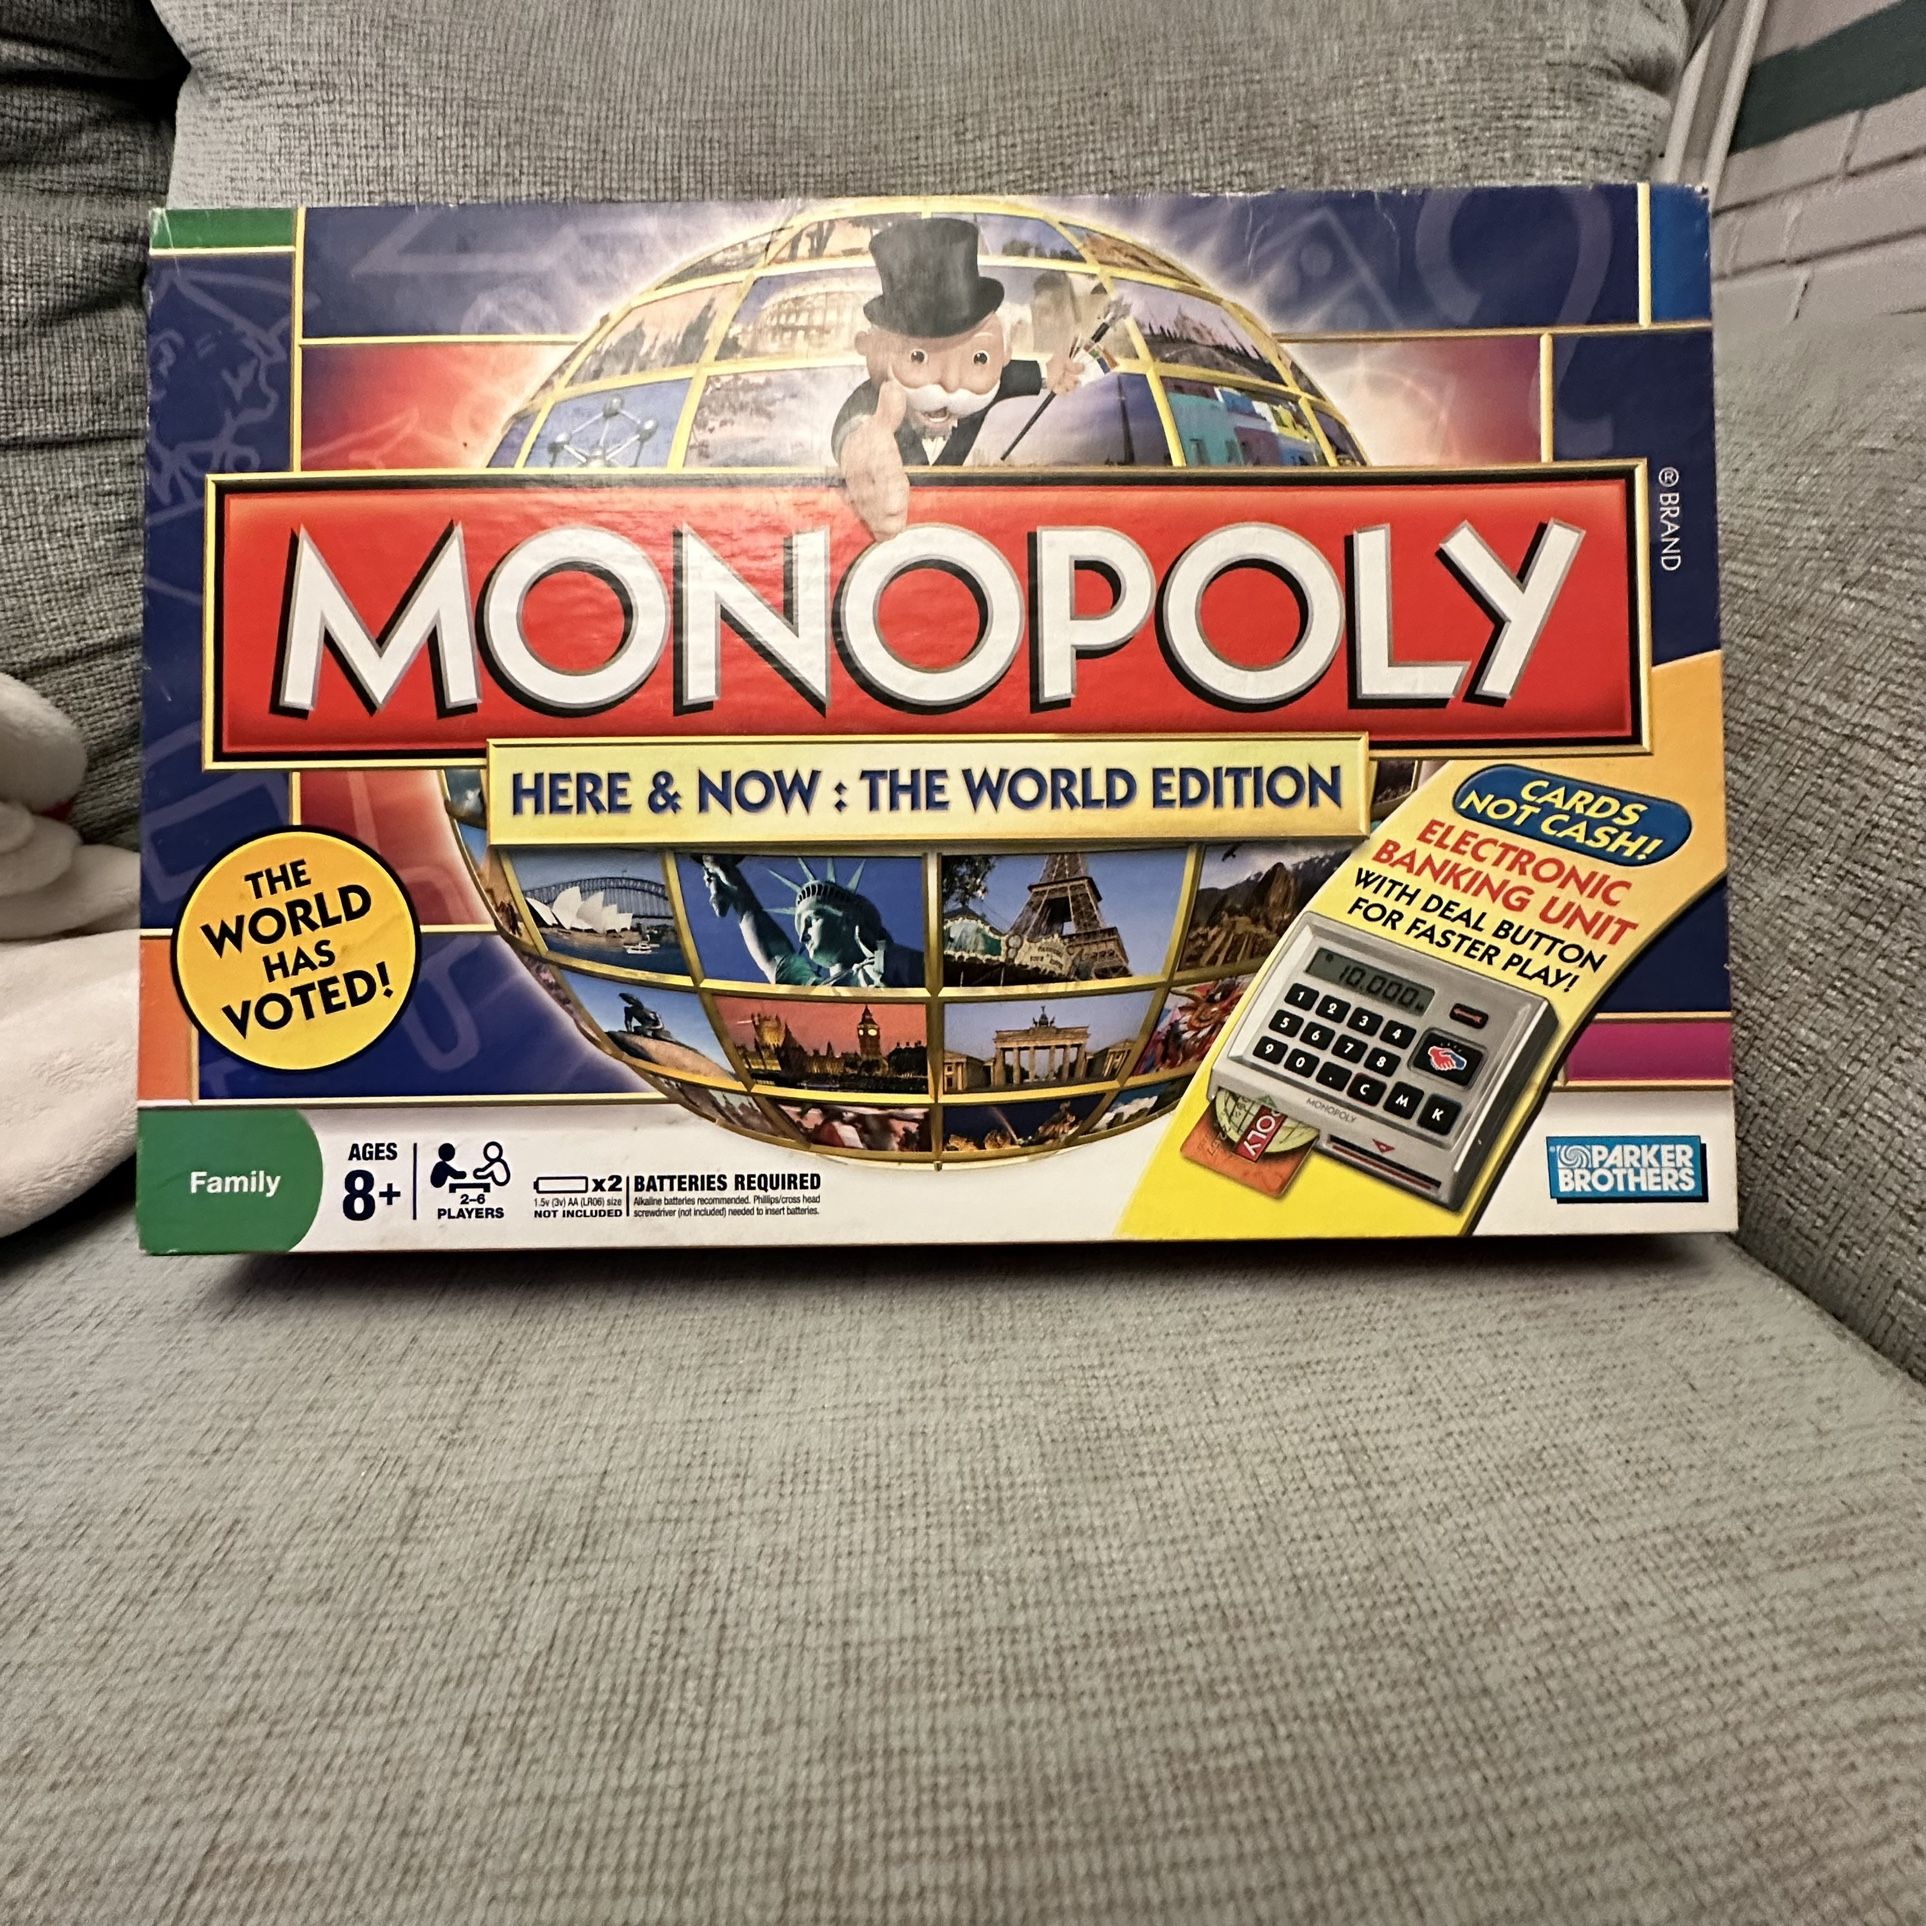 MONOPOLY HERE & NOW: THE WORLD EDITION BOARD GAME COMPLETE PARKER BROTHERS 2008